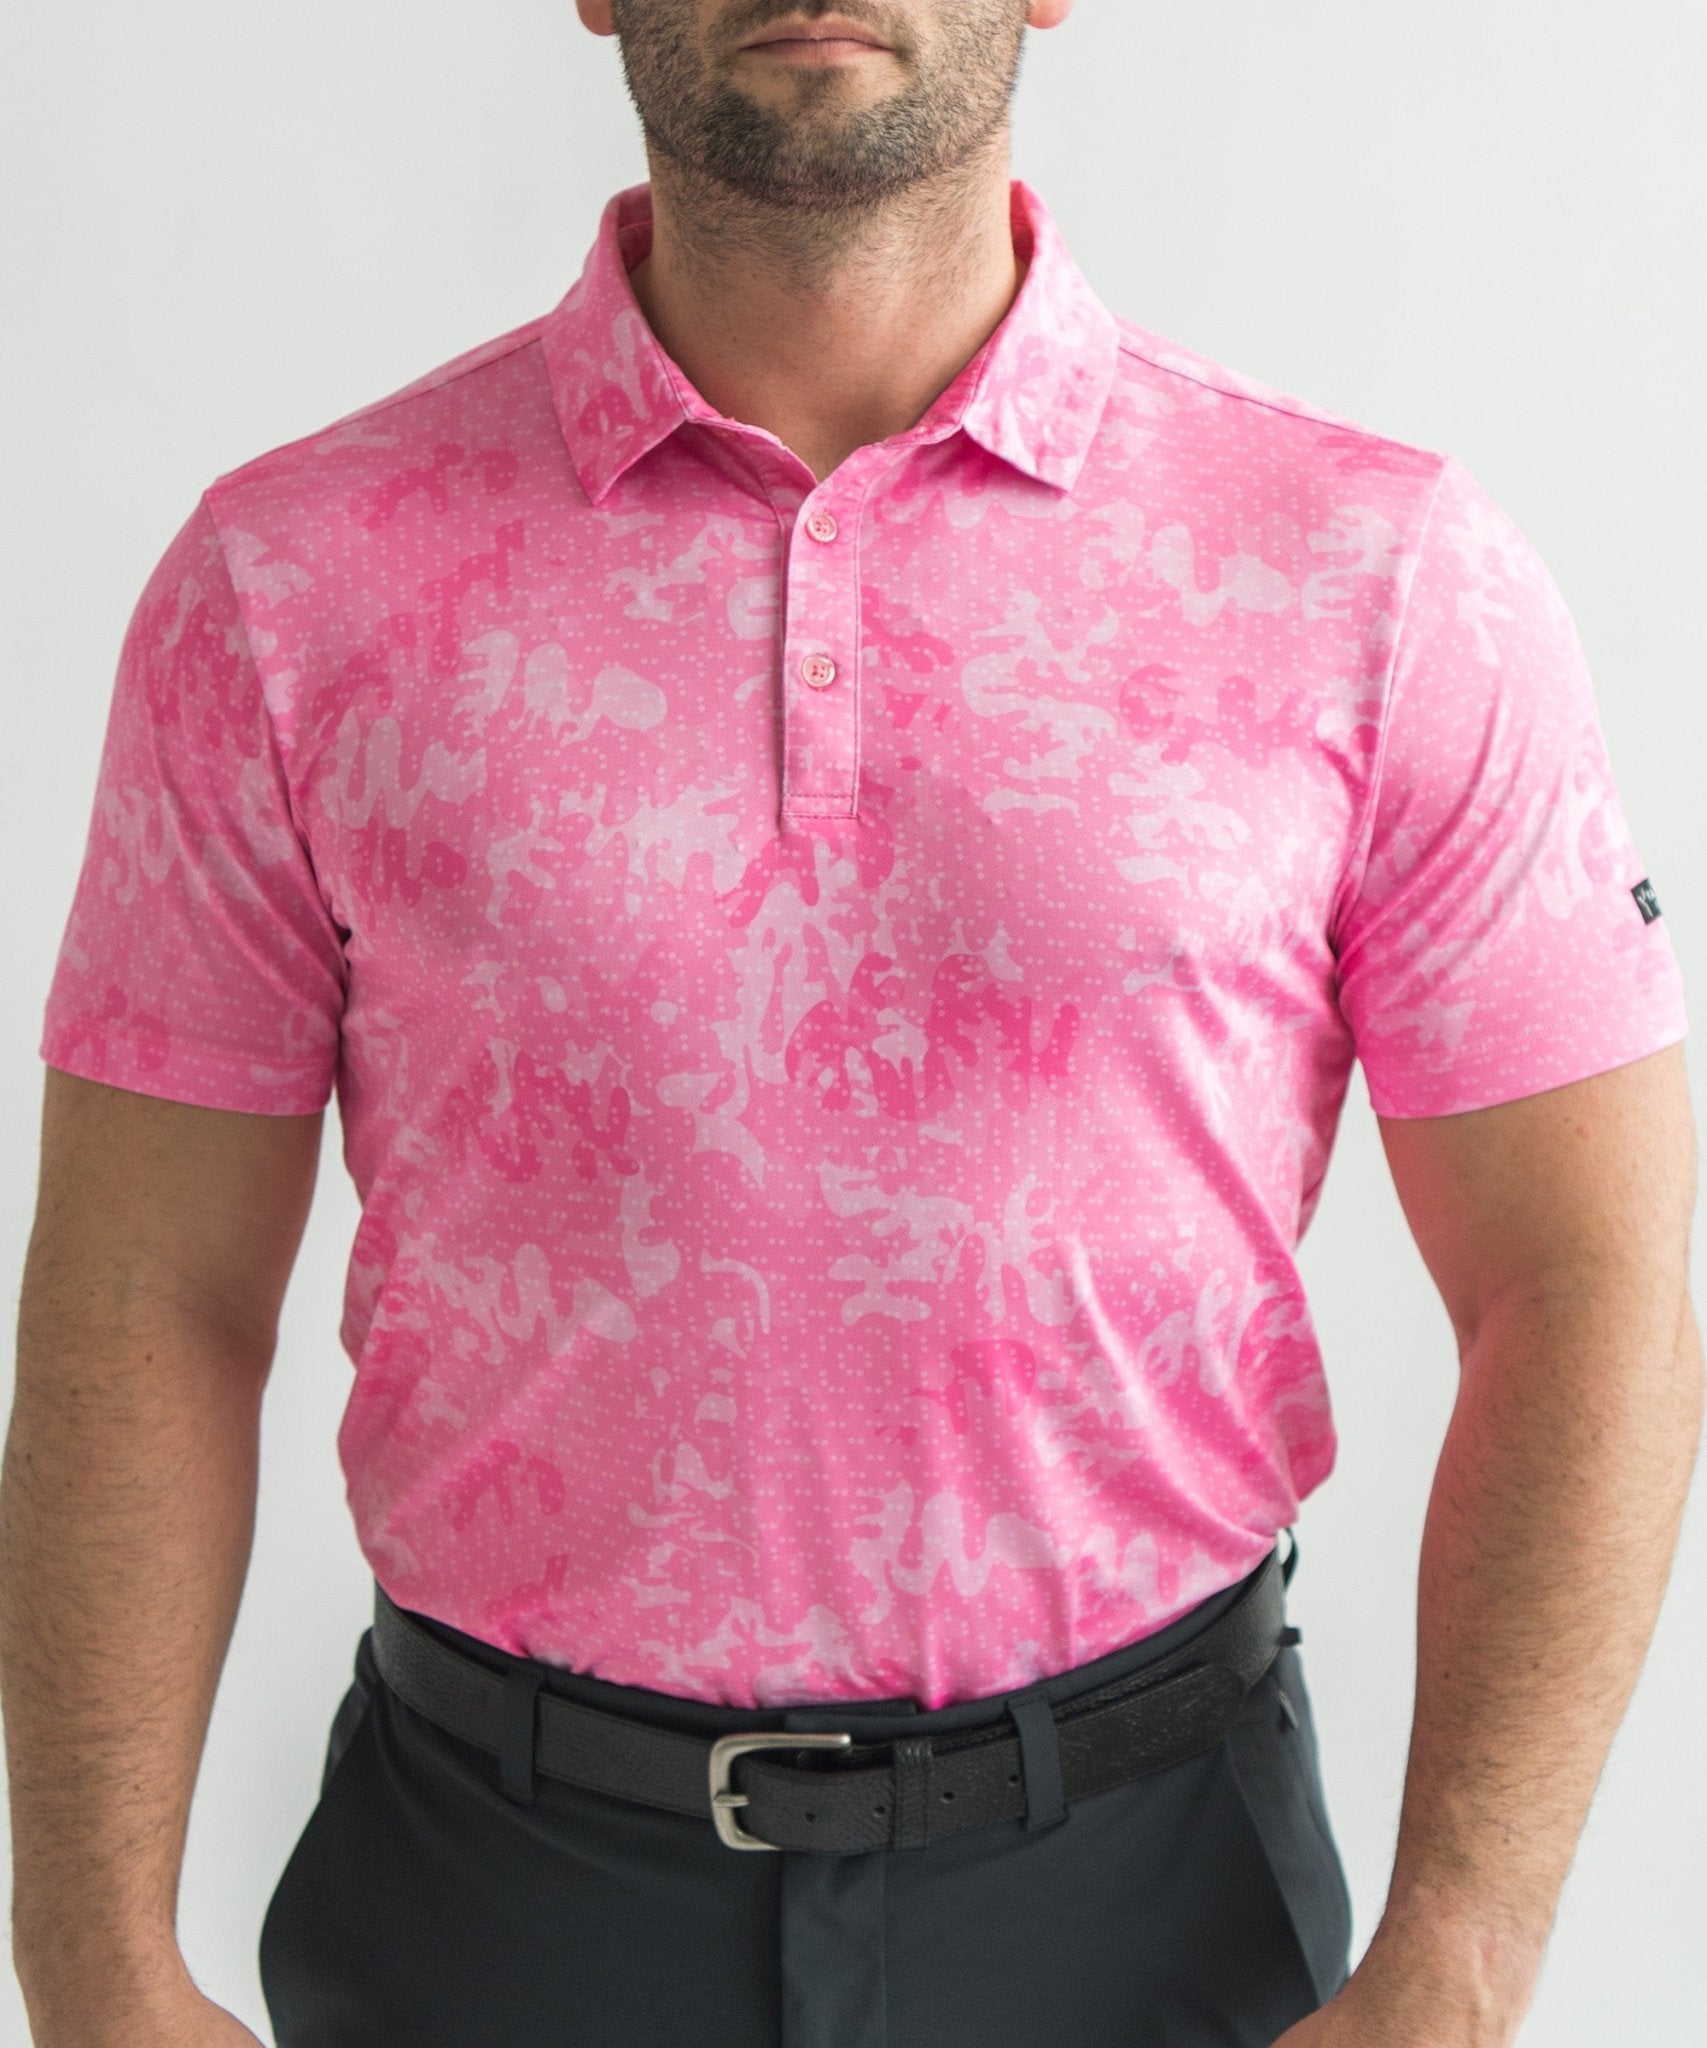 Mens Pink Golf Shirt - Pink Camo. Seriously Great Polos. Only $39.95 ...